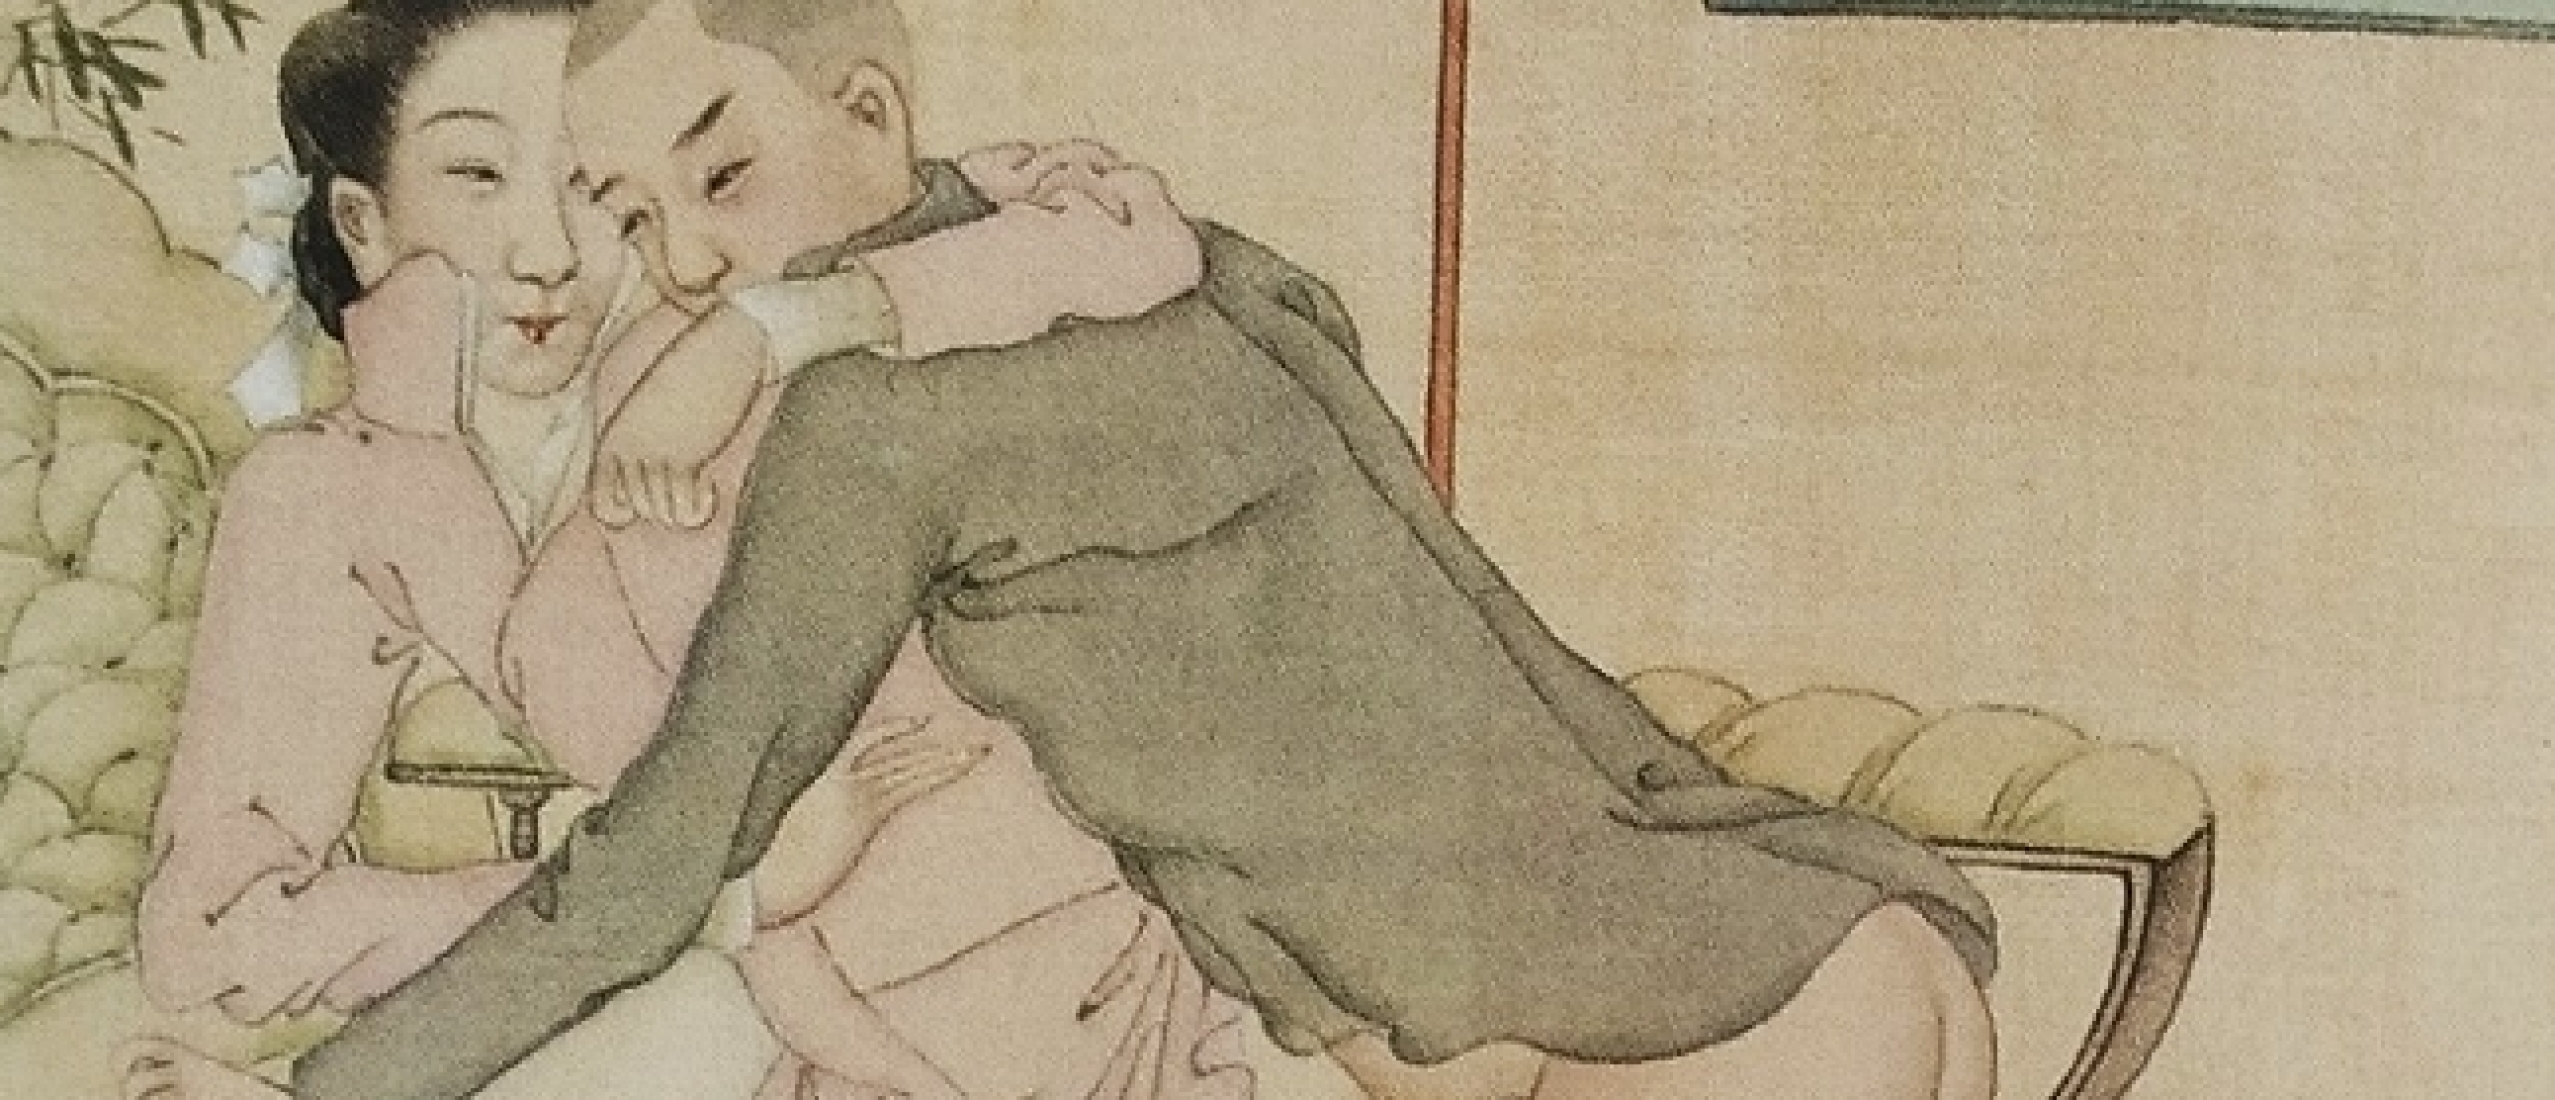 Young Intimate Lovers In the Fashion of 1920s' Shanghai